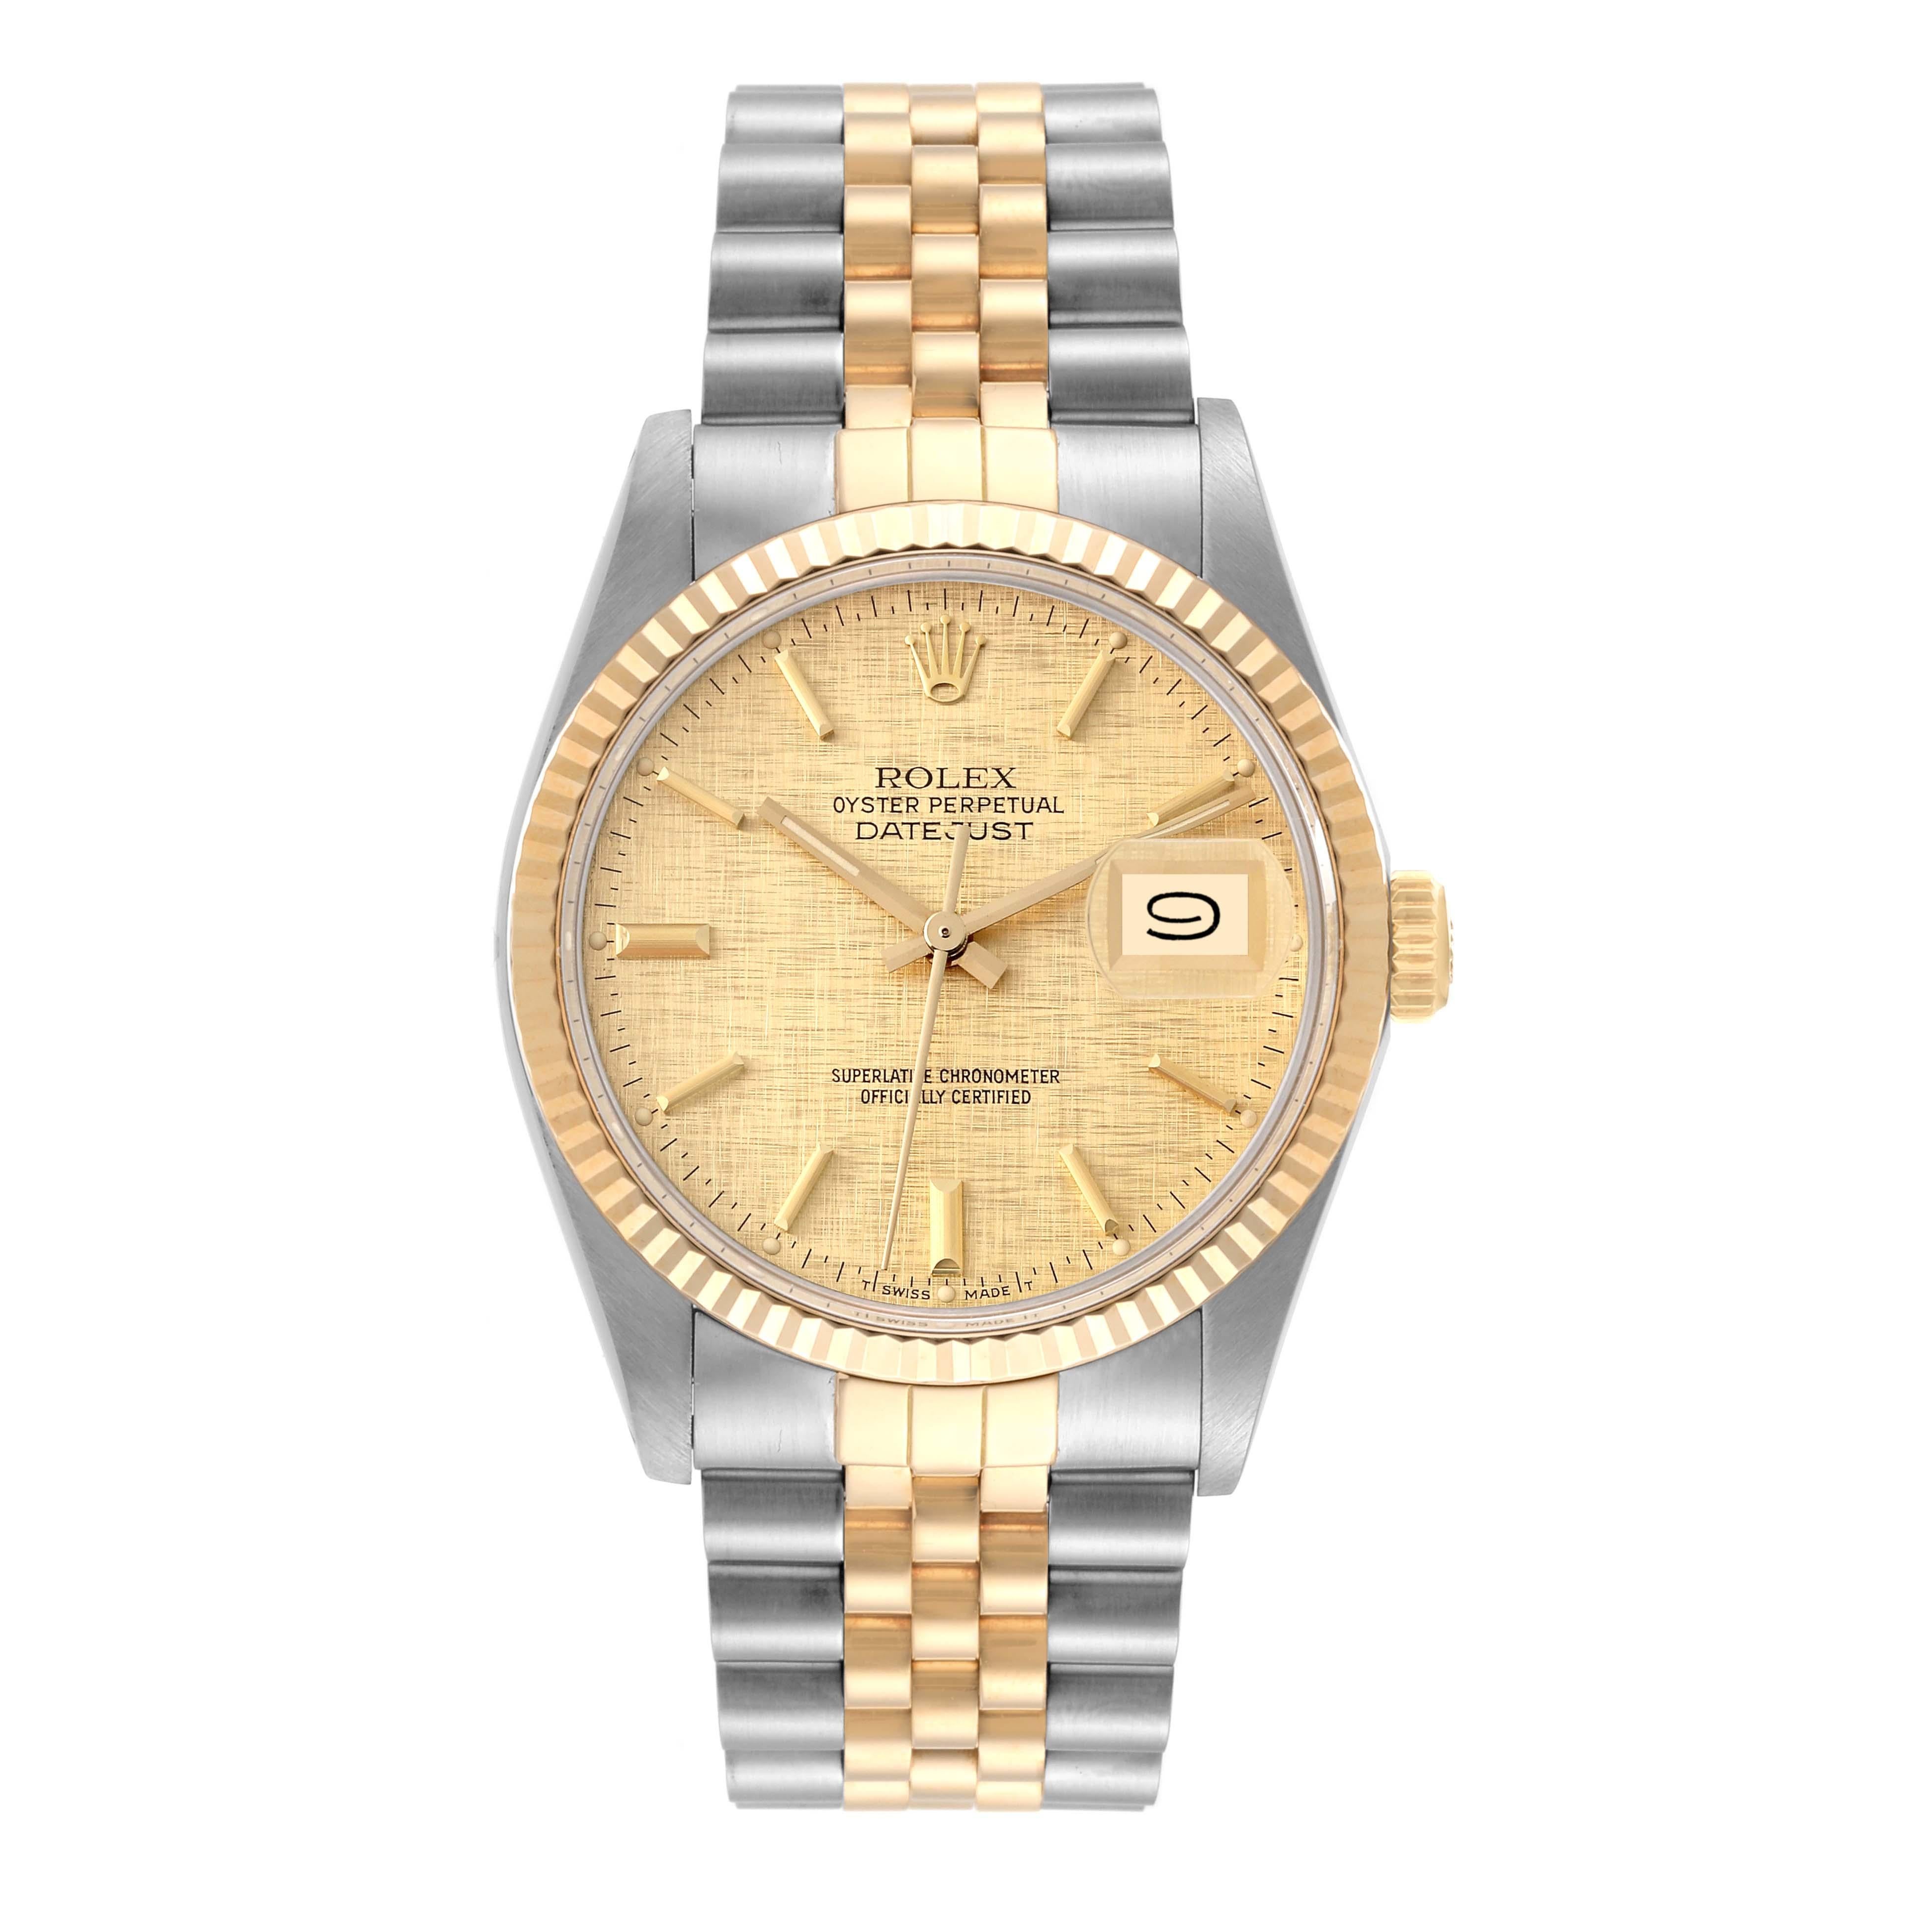 Rolex Datejust Steel Yellow Gold Linen Dial Vintage Mens Watch 16013. Officially certified chronometer automatic self-winding movement. Stainless steel and 18K yellow gold oyster case 36.0 mm in diameter. Rolex logo on an 18k yellow gold crown. 18k